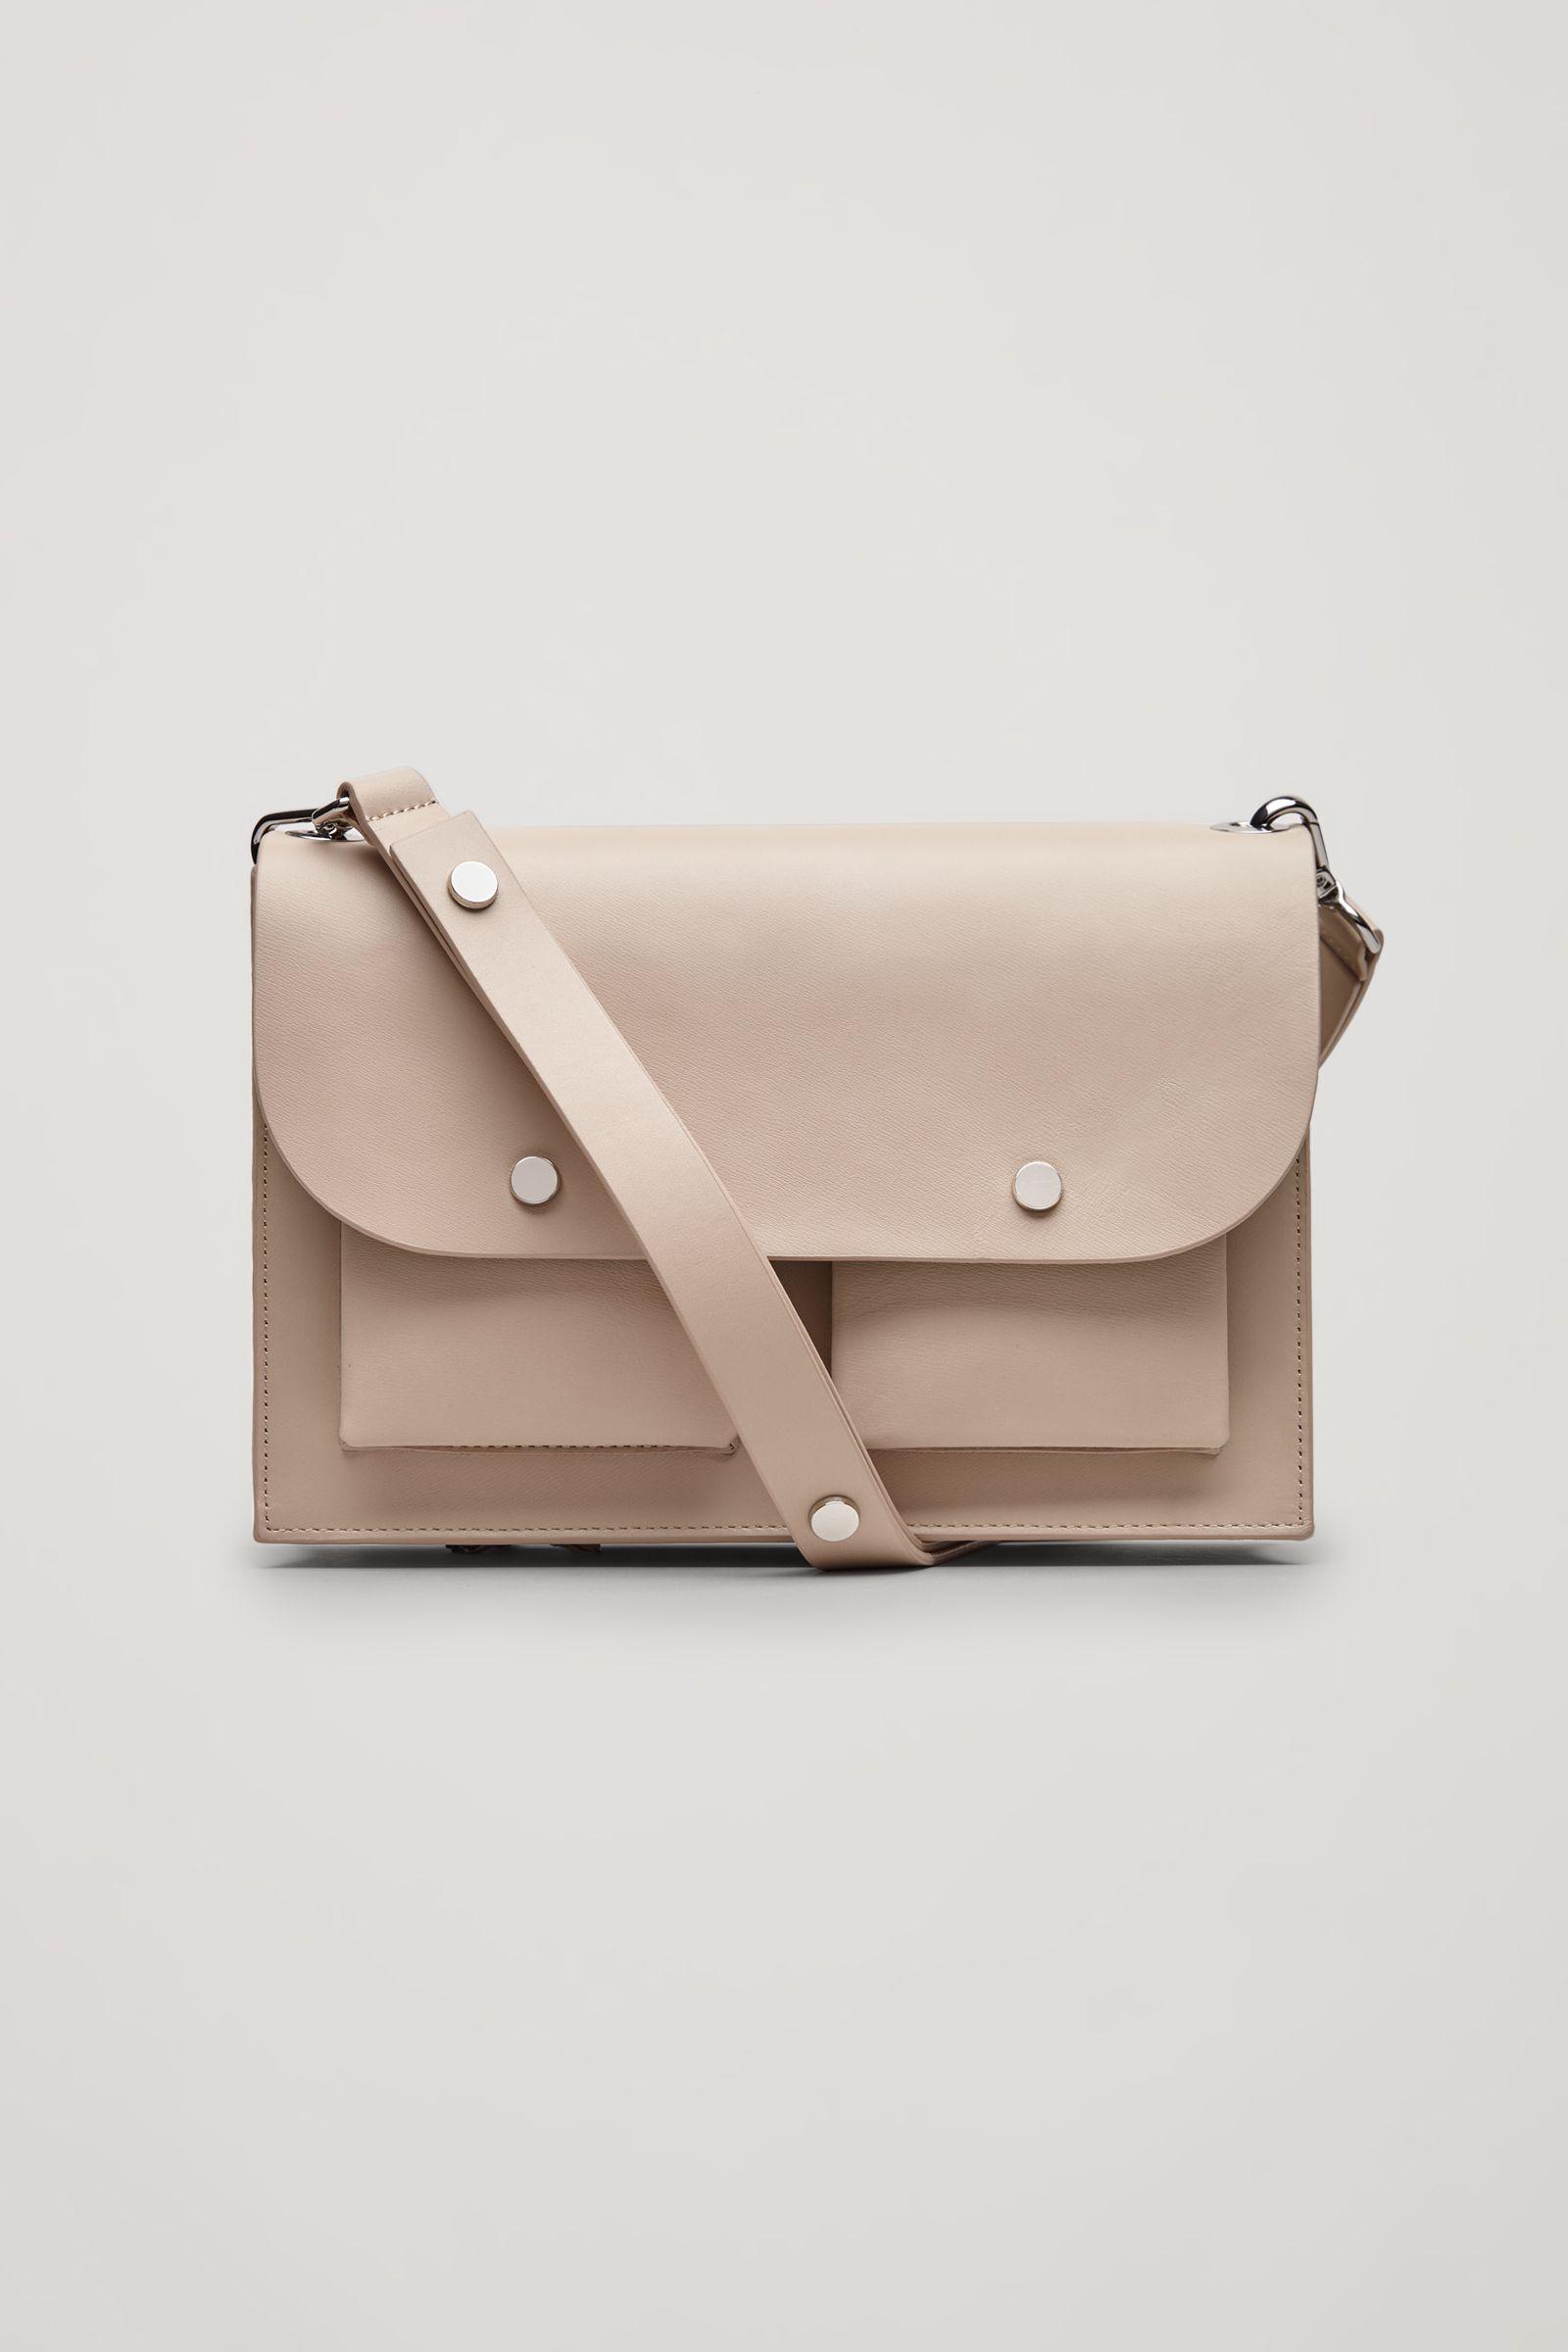 COS Leather Shoulder Bag With Front Pockets in Natural - Lyst